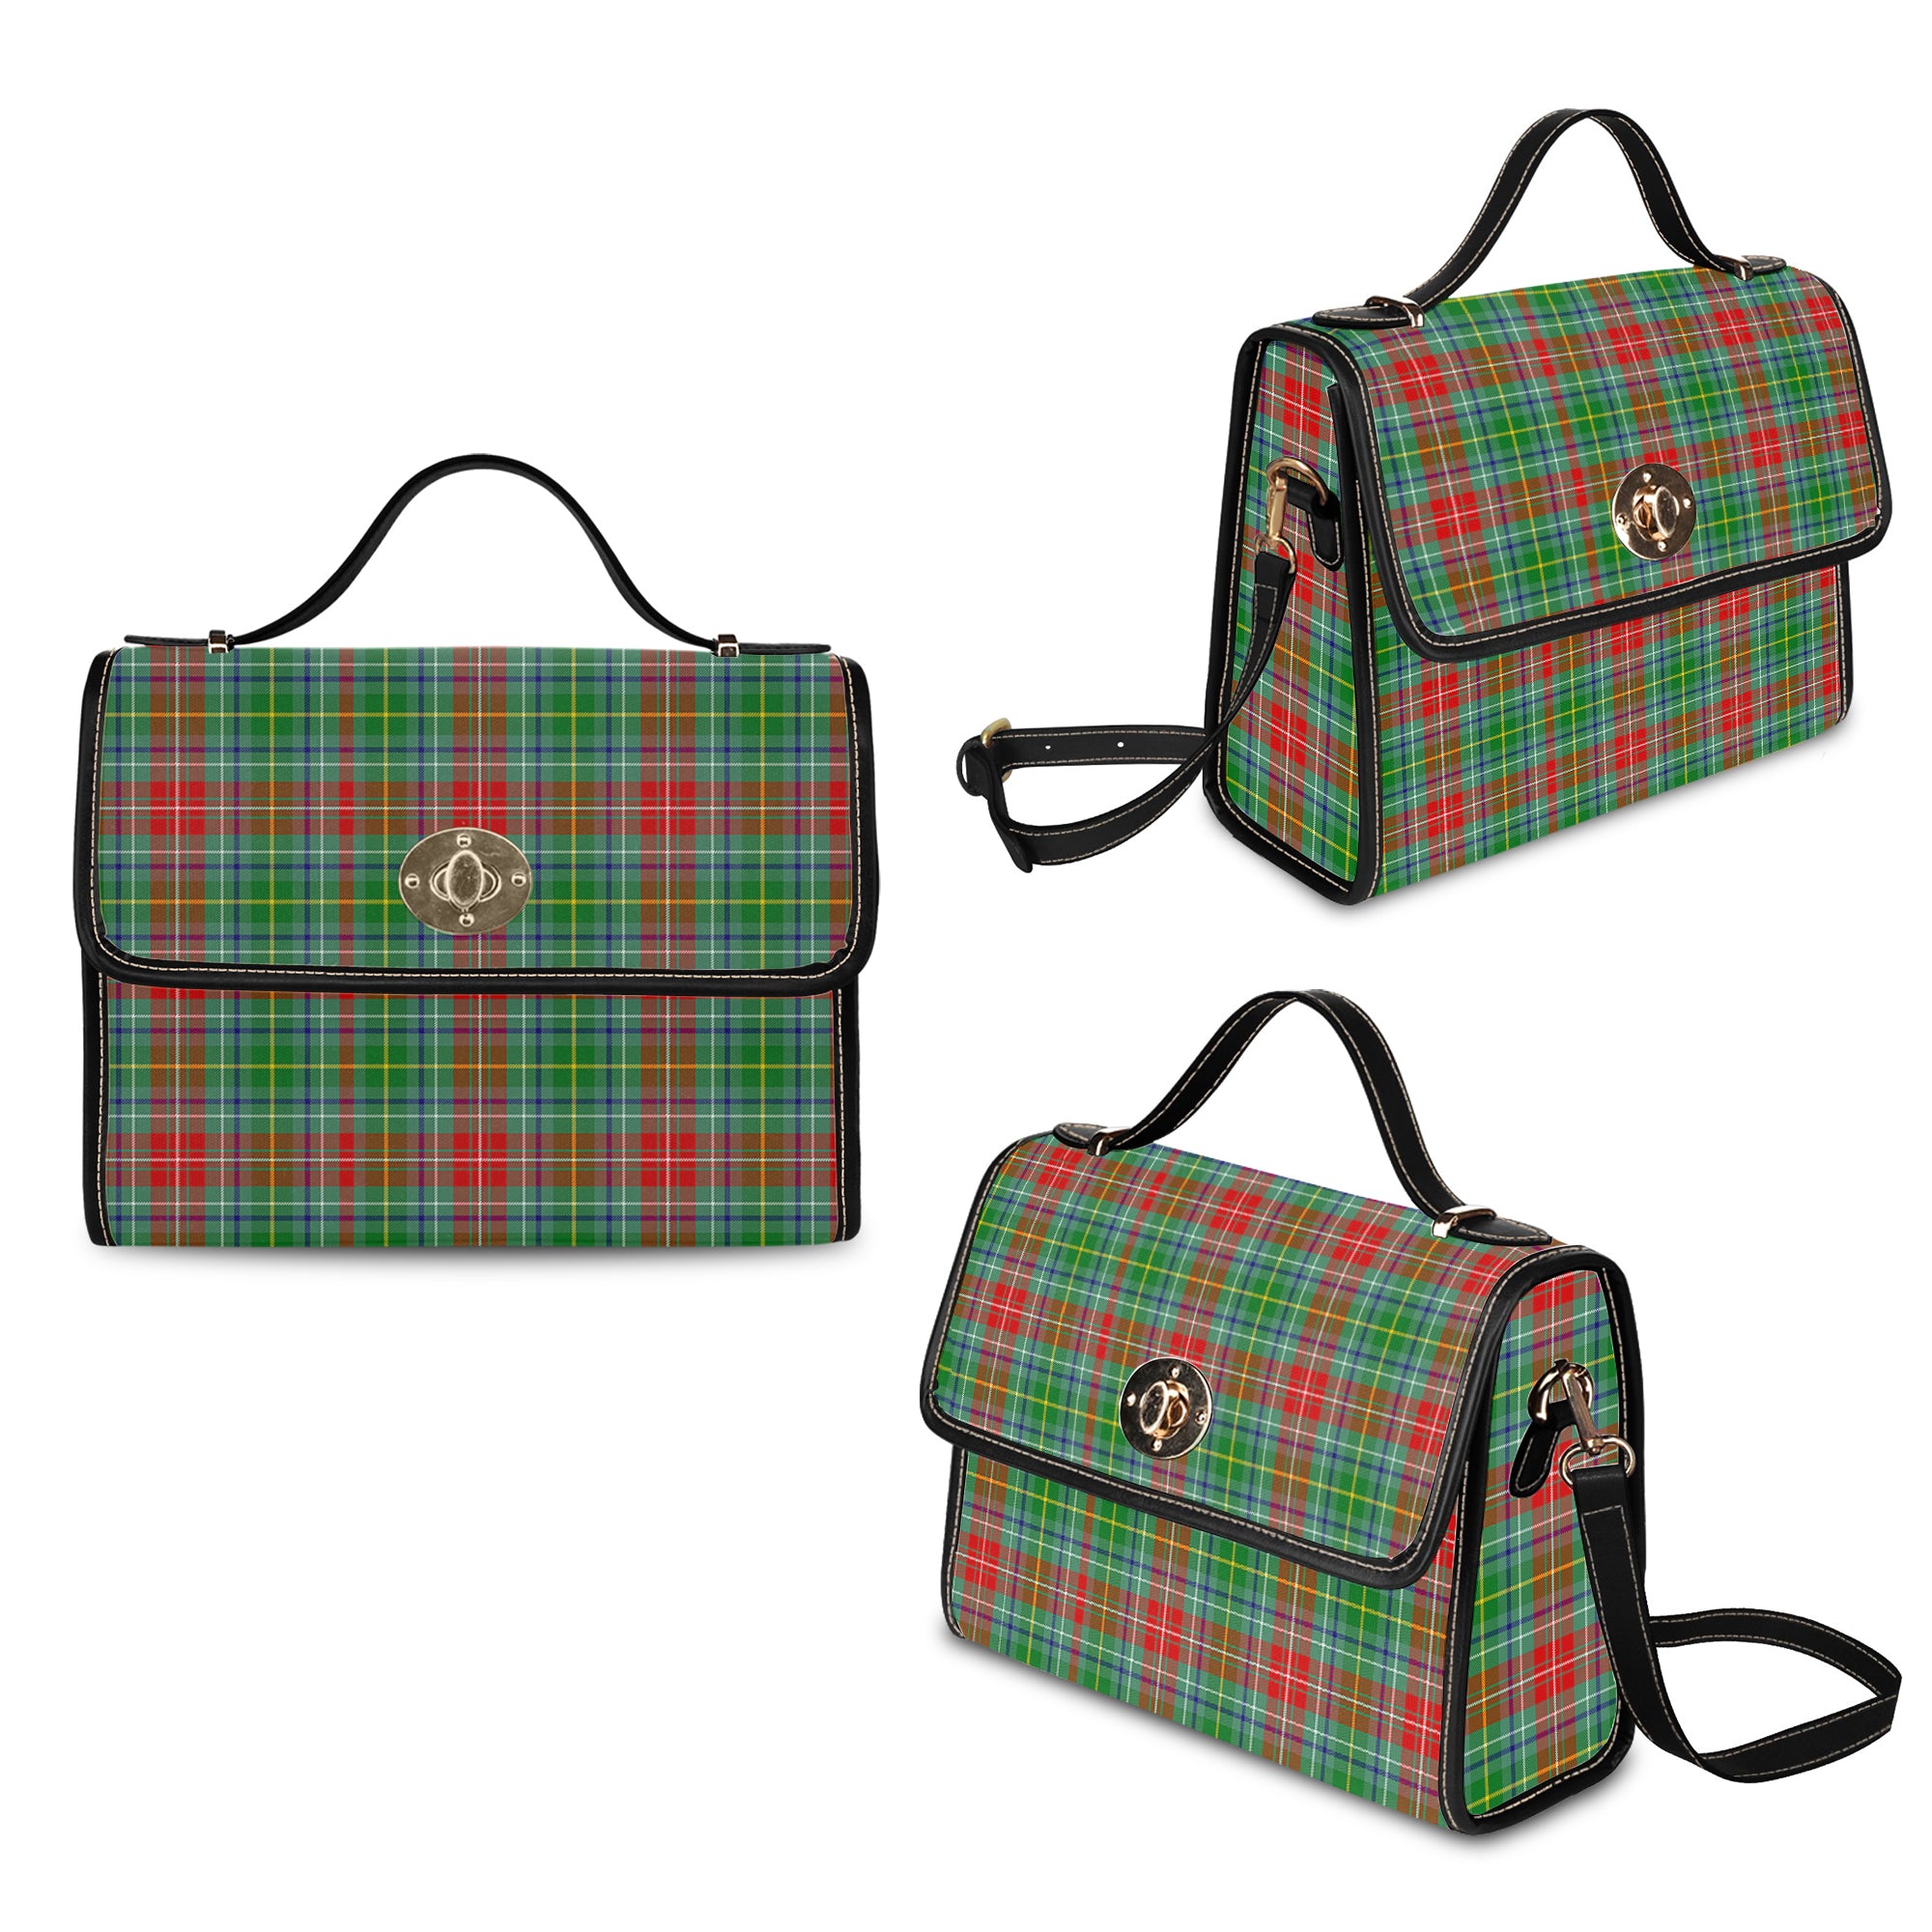 muirhead-tartan-canvas-bag-with-leather-shoulder-strap